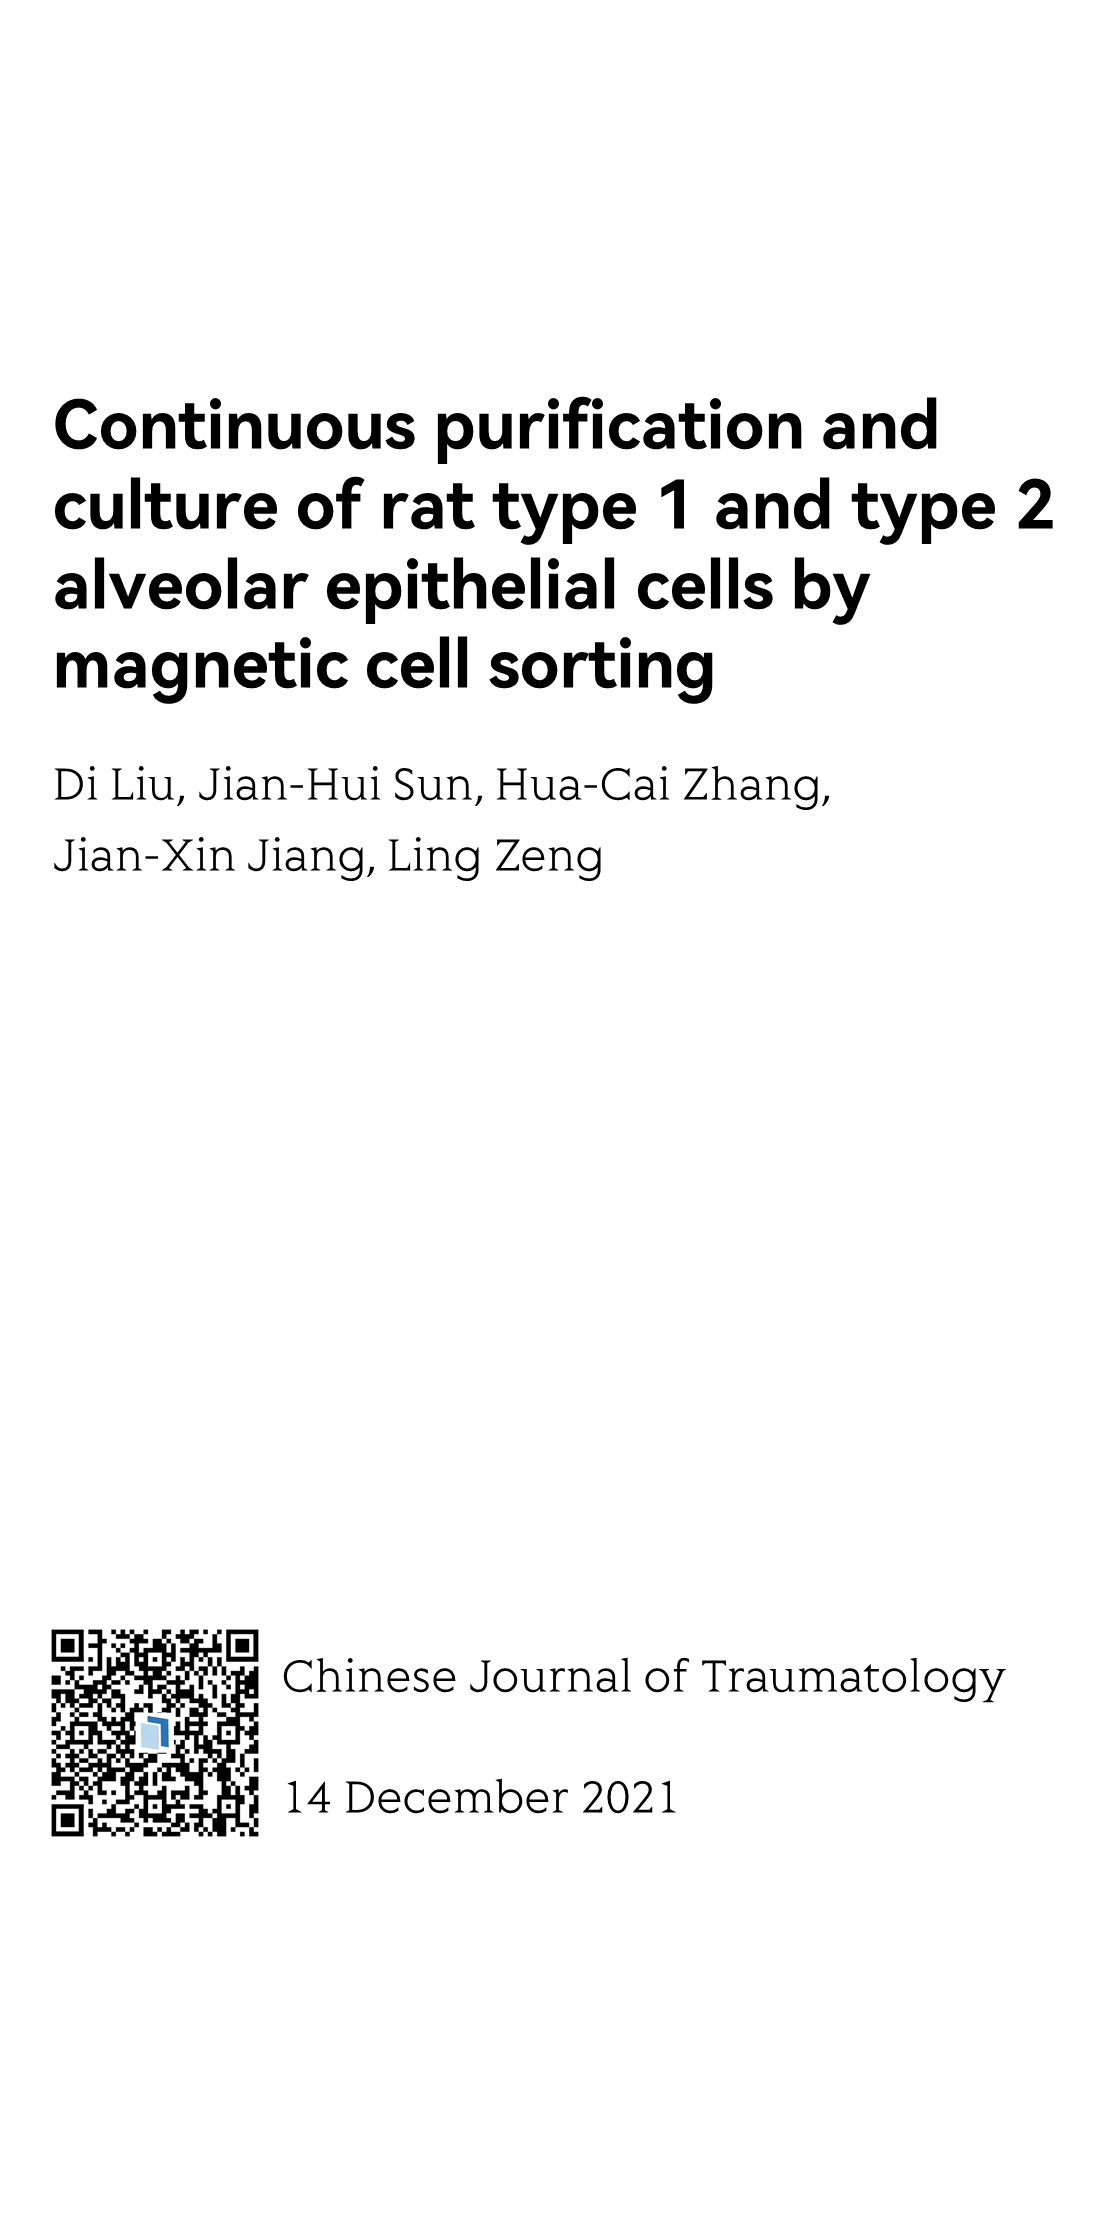 Continuous purification and culture of rat type 1 and type 2 alveolar epithelial cells by magnetic cell sorting_1